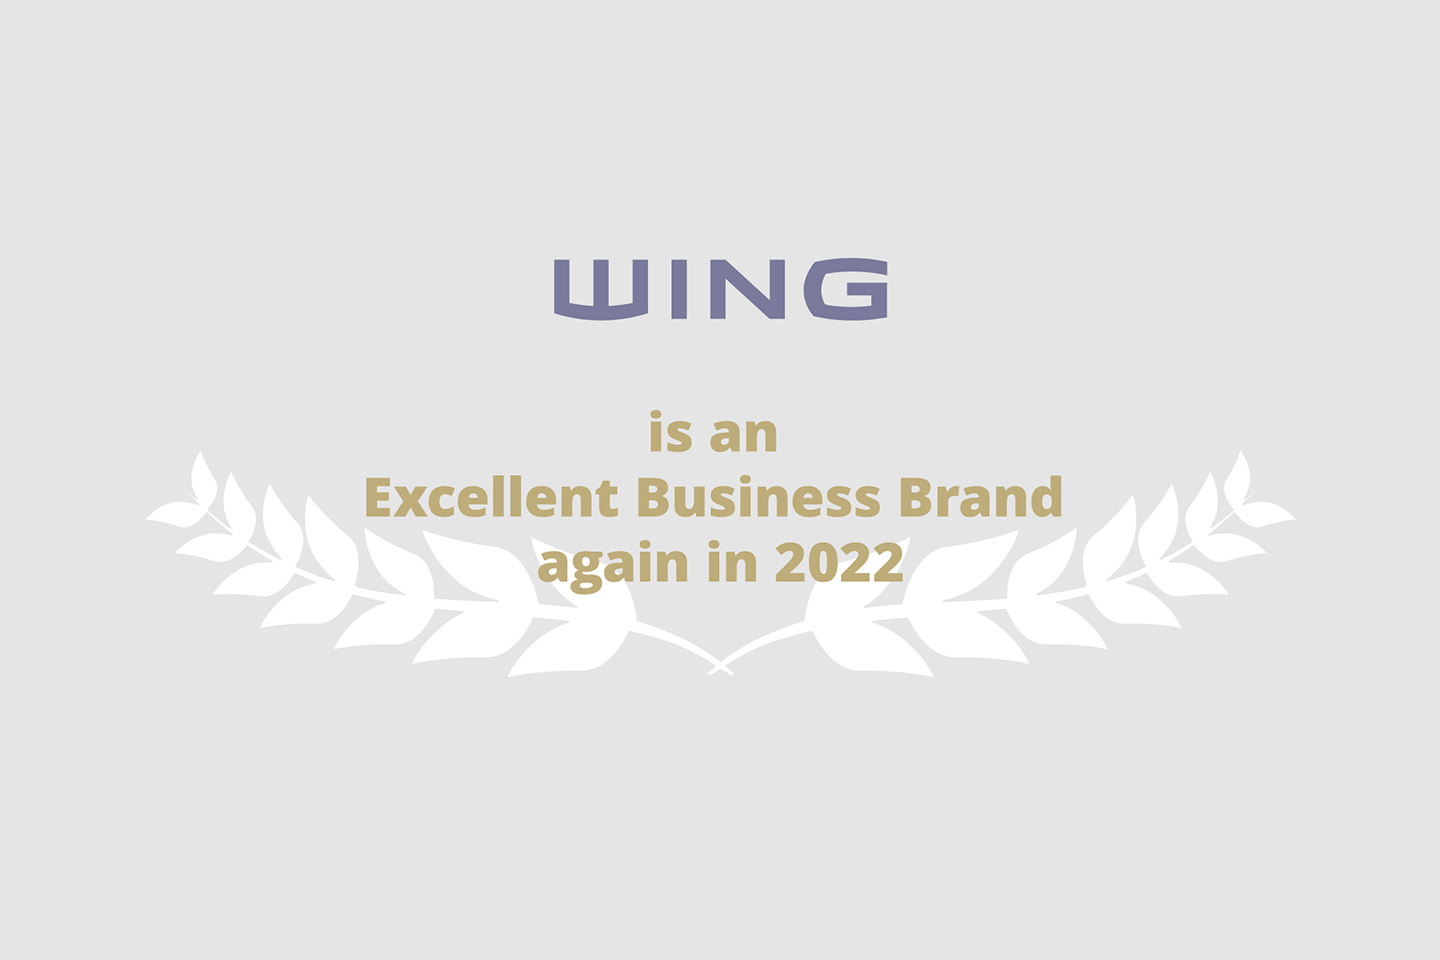 WING has won in MagyarBrands’ Excellent Business Brands category once again in 2022